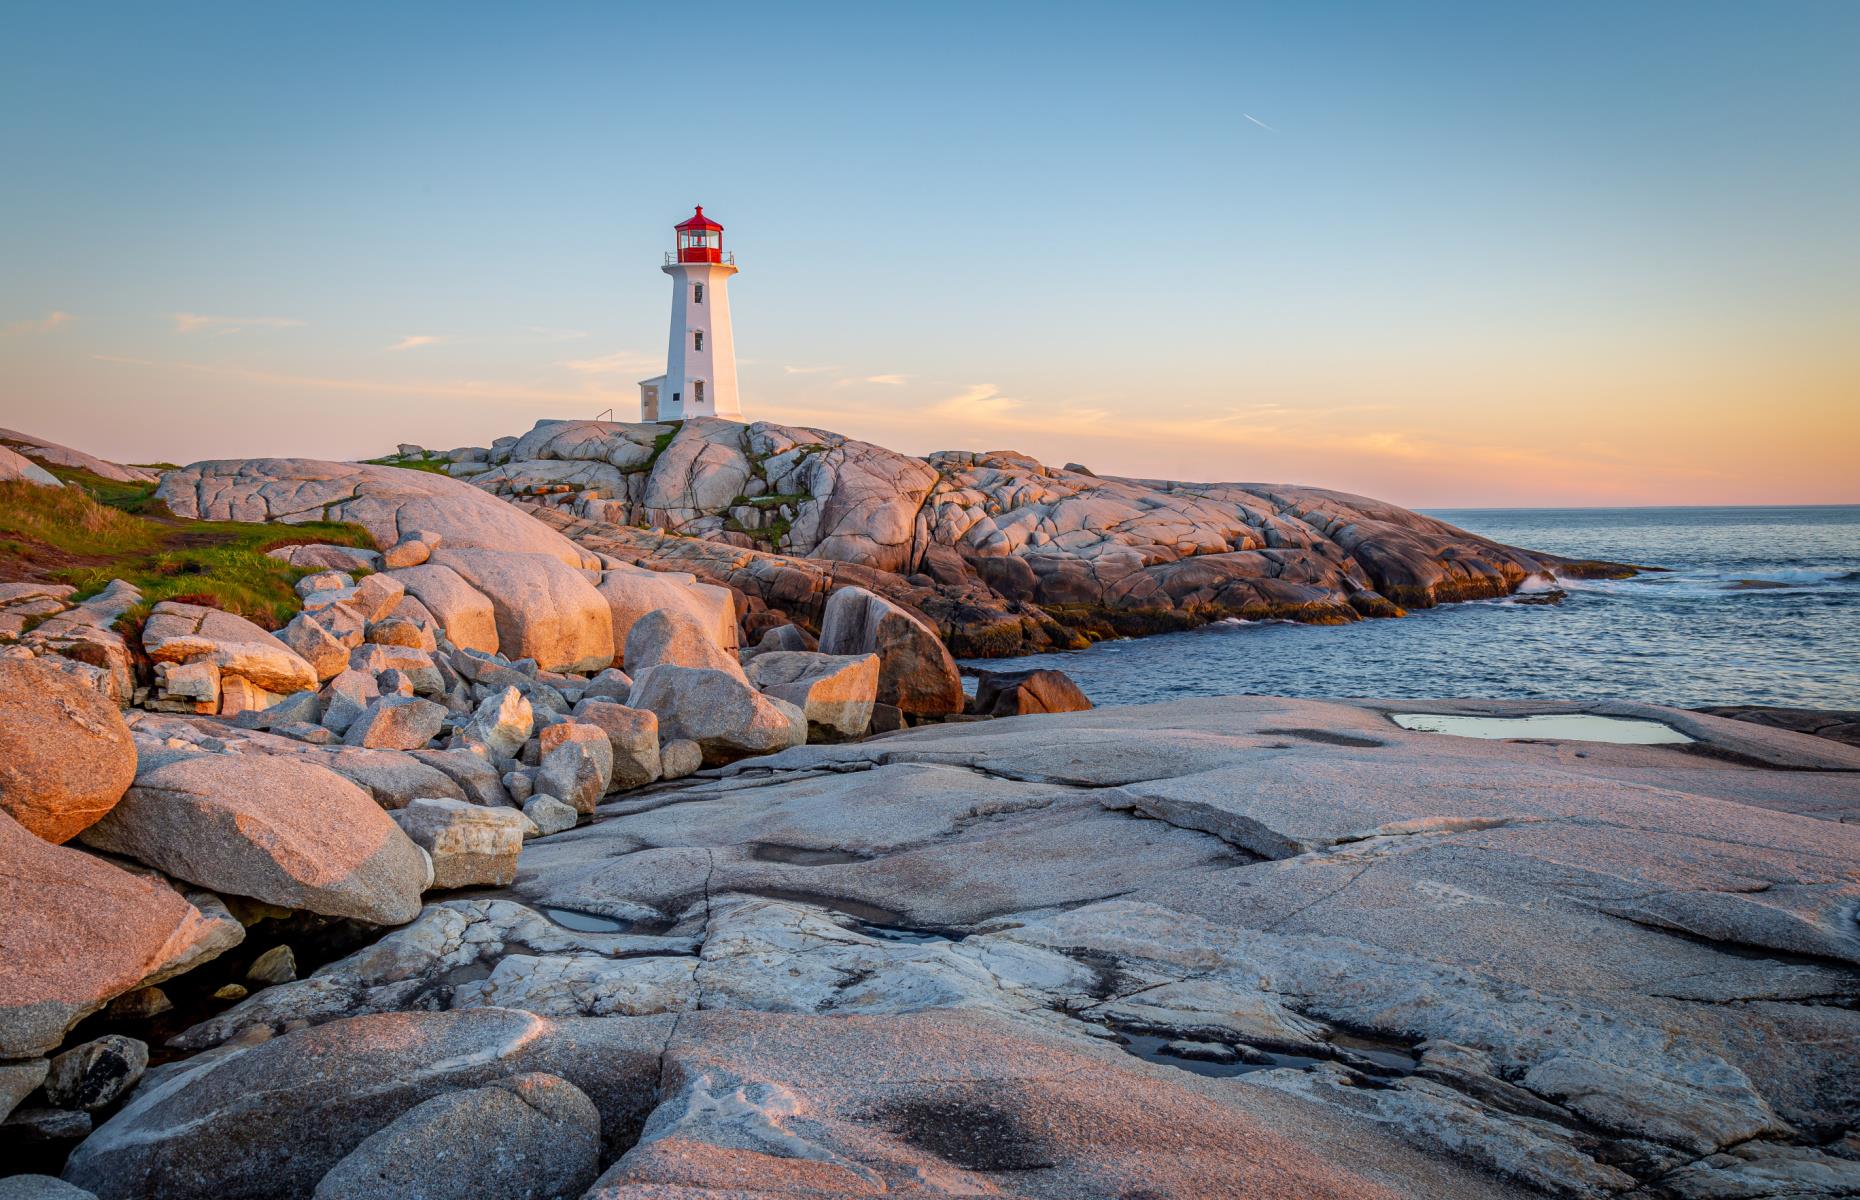 <p>One of the most familiar sights in Canada, the lighthouse at Peggy’s Cove is a national icon. Visitors to this small East Coast community can walk up to the lighthouse and watch the waves dramatically crash on the rocks without paying a cent. There’s more to see than the lighthouse though – be sure to poke around the adjacent village filled with fishing boats and old lobster traps for a postcard-perfect slice of maritime charm.</p>  <p><a href="https://www.loveexploring.com/galleries/204784/canada-in-crisis-why-climate-change-is-ruining-the-country?page=1"><strong>Canada in crisis: discover the desperate damage climate change is doing to the country</strong></a></p>